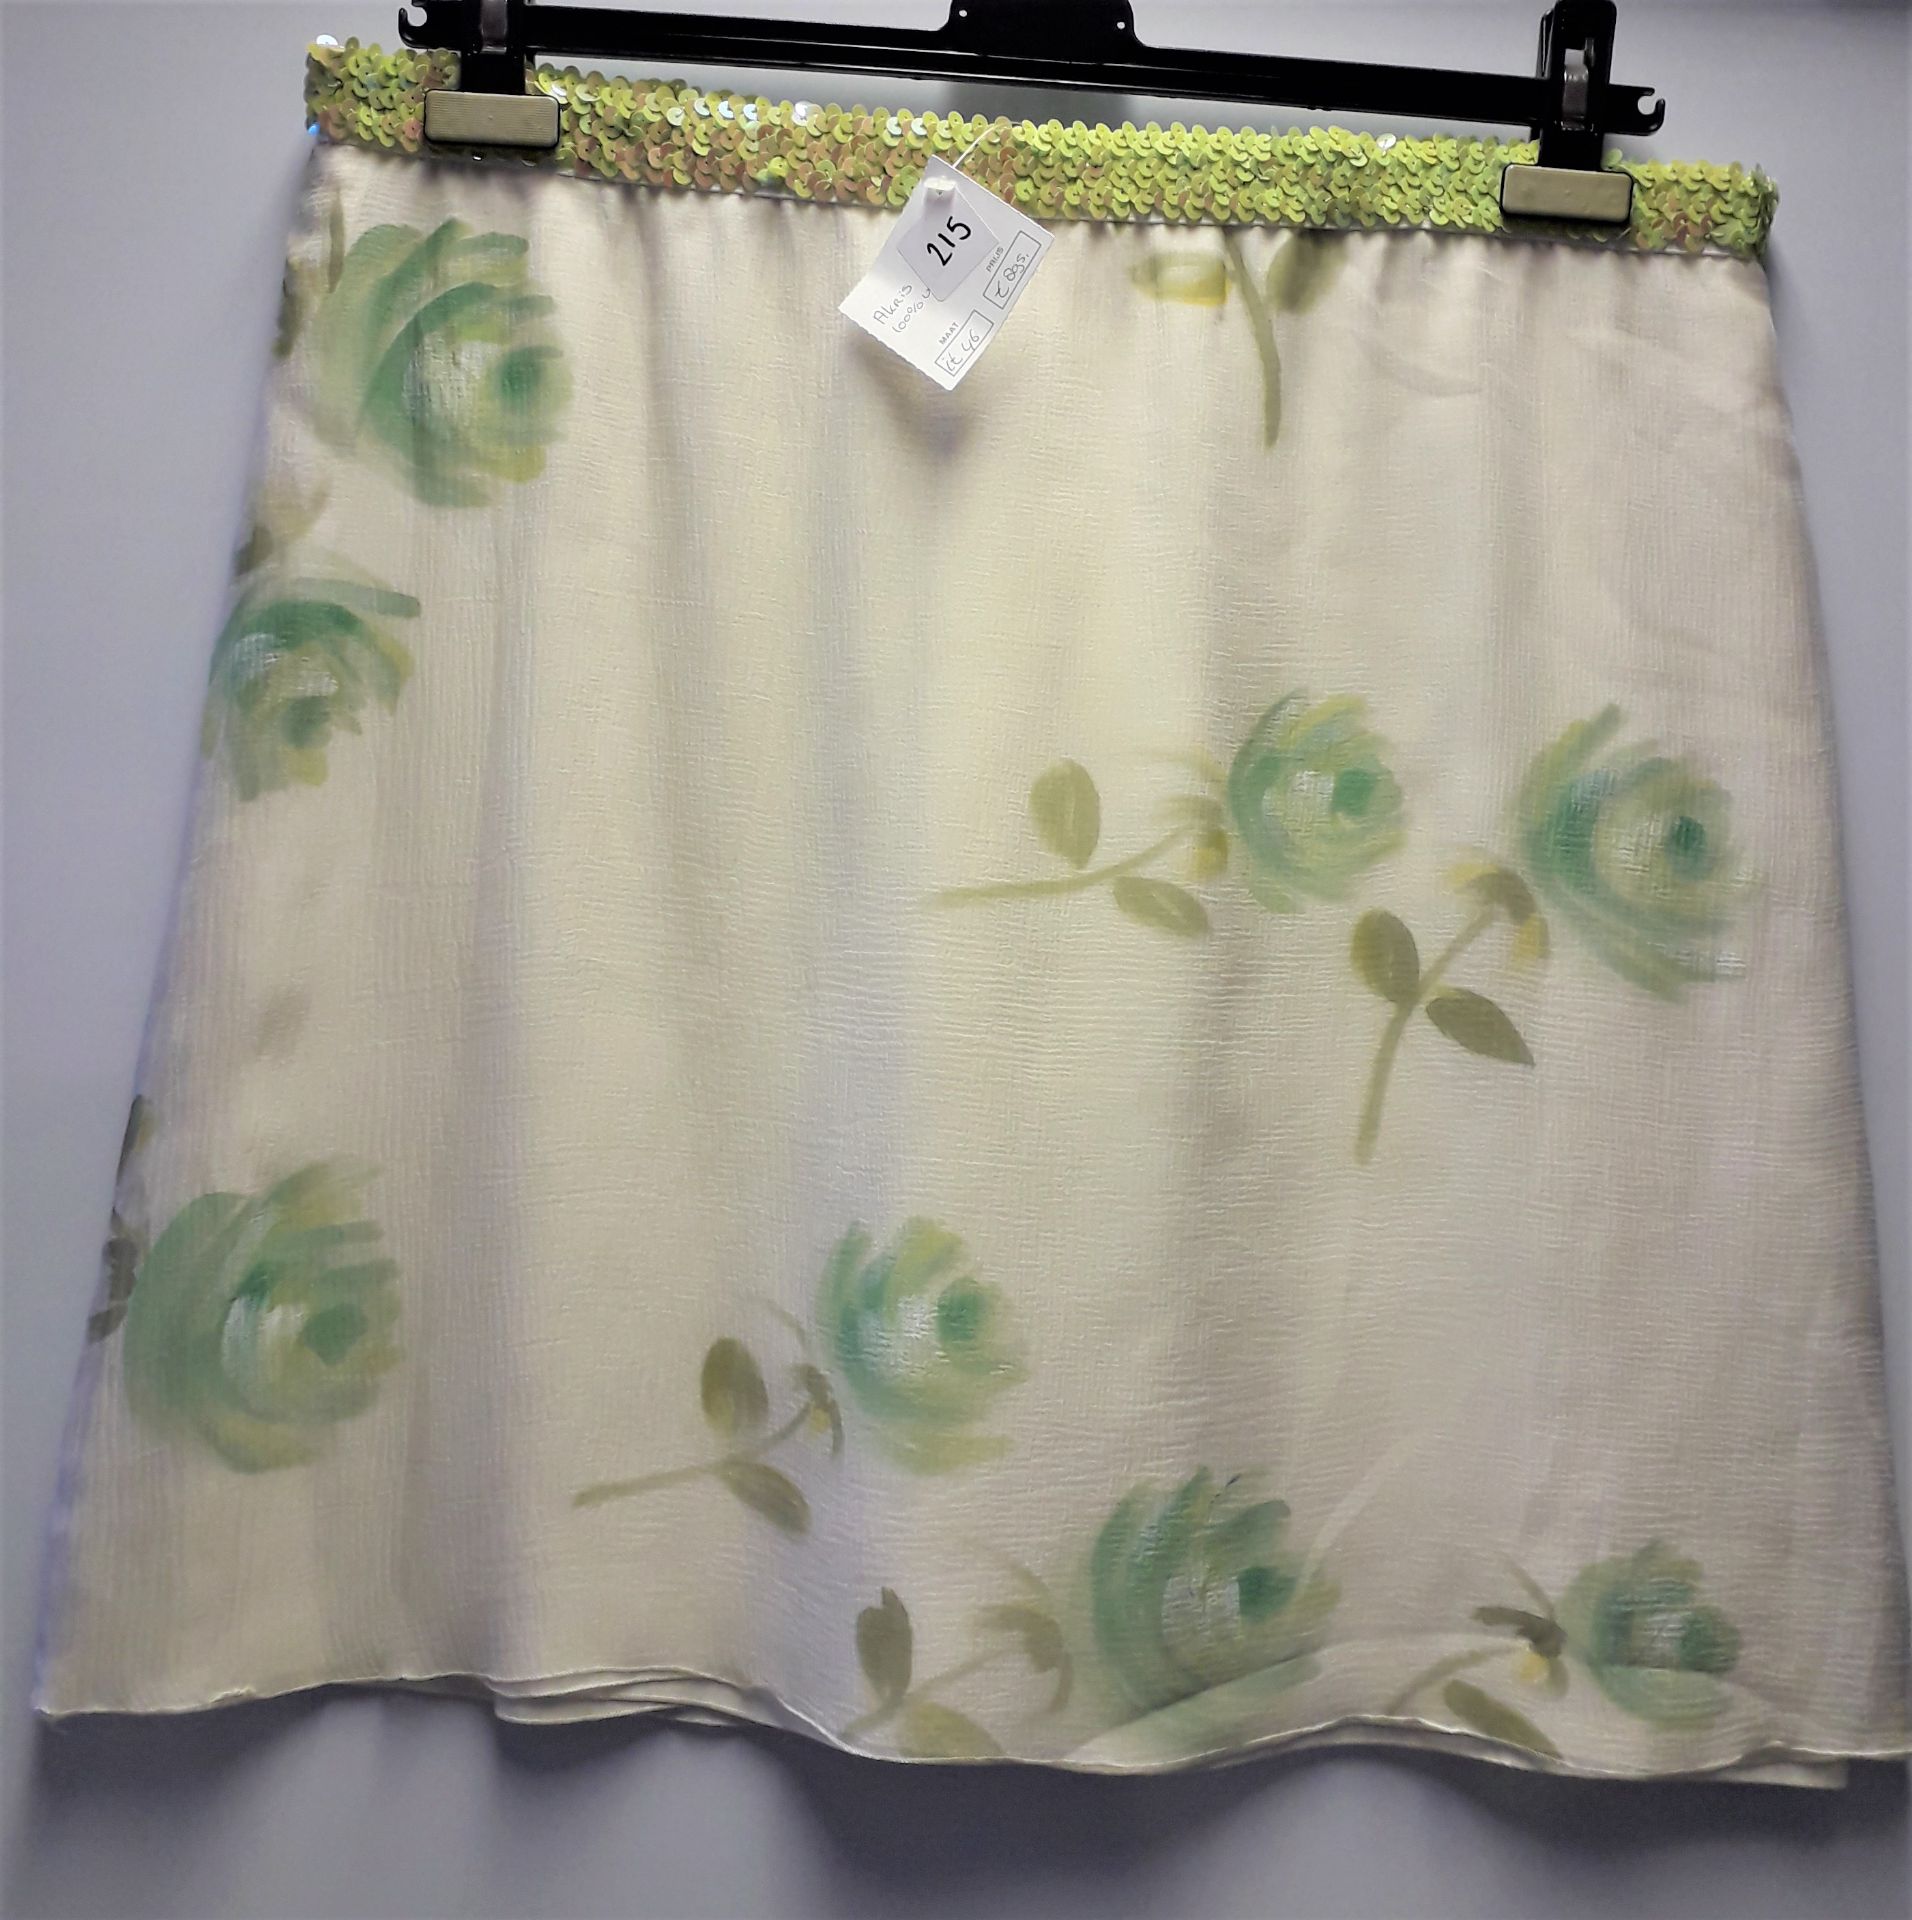 1 x Boutique Le Duc Cream Floral Skirt With Sequin Waistband - Size: 14 - Material: 100% Voilesoie - - Image 4 of 7